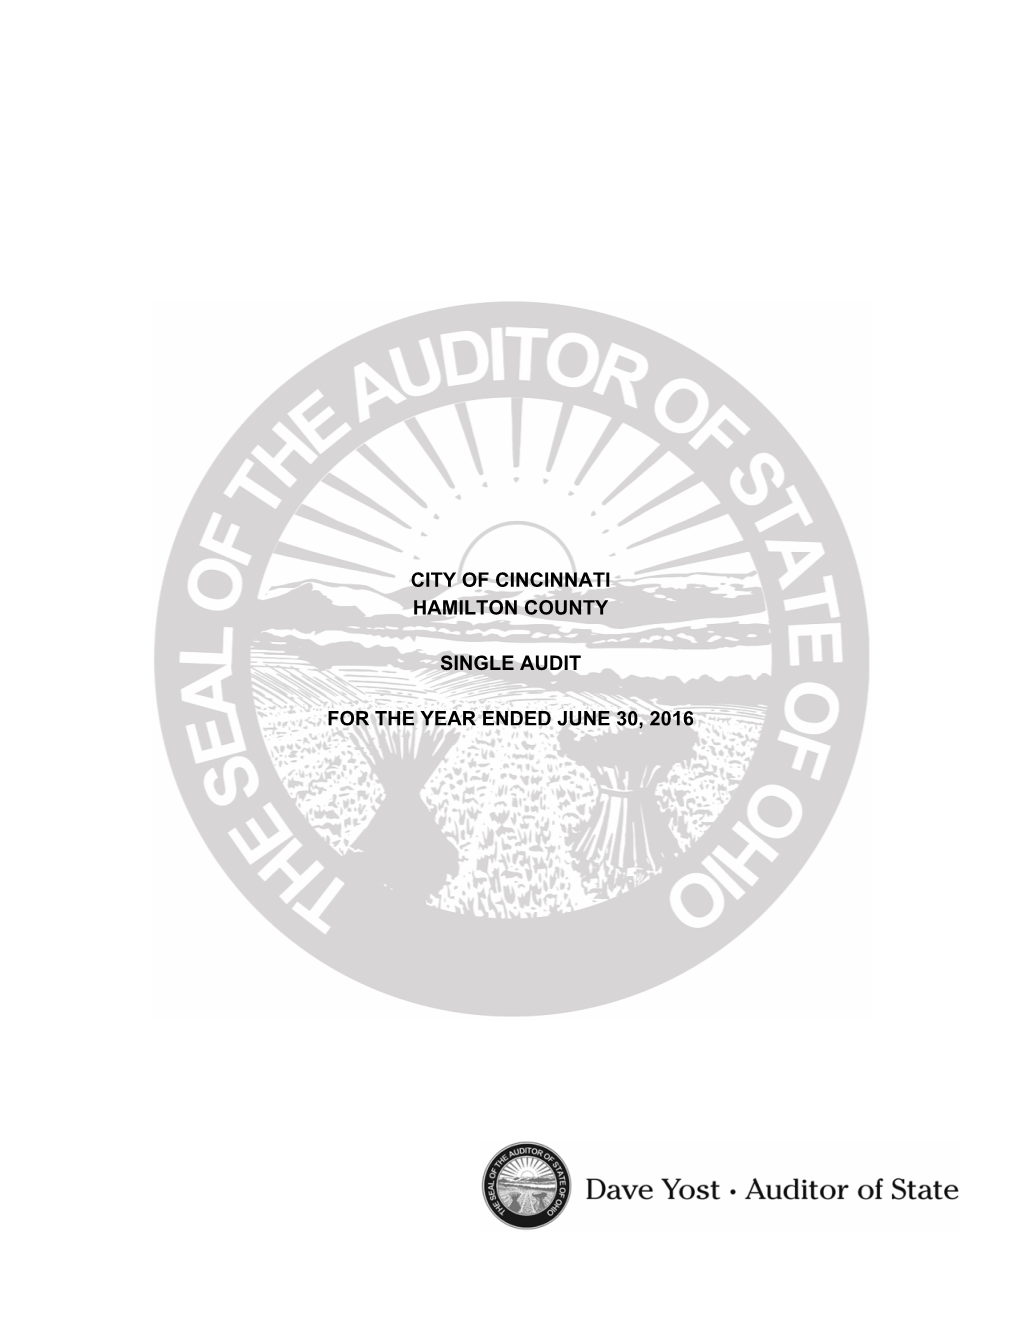 City of Cincinnati Hamilton County Single Audit for the Year Ended June 30, 2016